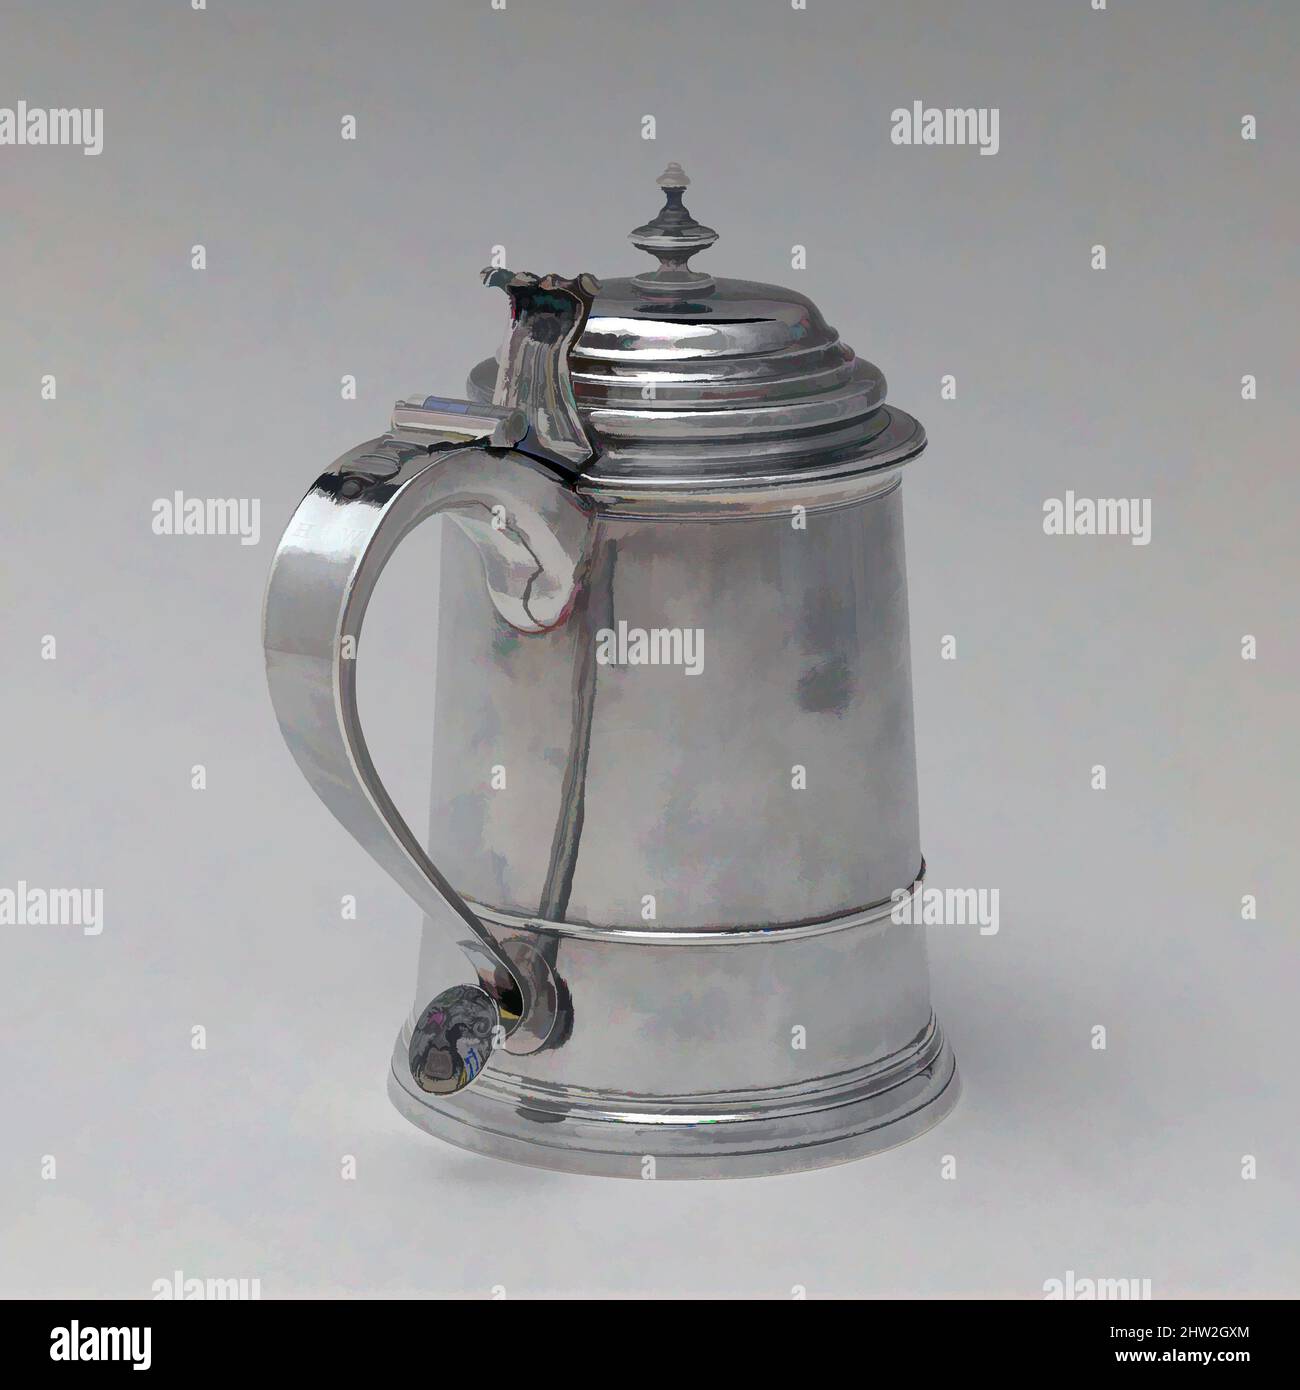 Art inspired by Tankard, ca5, Made in Boston, Massachusetts, United States, American, Silver, Overall: 7 7/8 x 6 15/16 in. (20 x 17.6 cm); 24 oz. 16 dwt. (771 g), Silver, John Burt (1692/93–1745/46, Classic works modernized by Artotop with a splash of modernity. Shapes, color and value, eye-catching visual impact on art. Emotions through freedom of artworks in a contemporary way. A timeless message pursuing a wildly creative new direction. Artists turning to the digital medium and creating the Artotop NFT Stock Photo